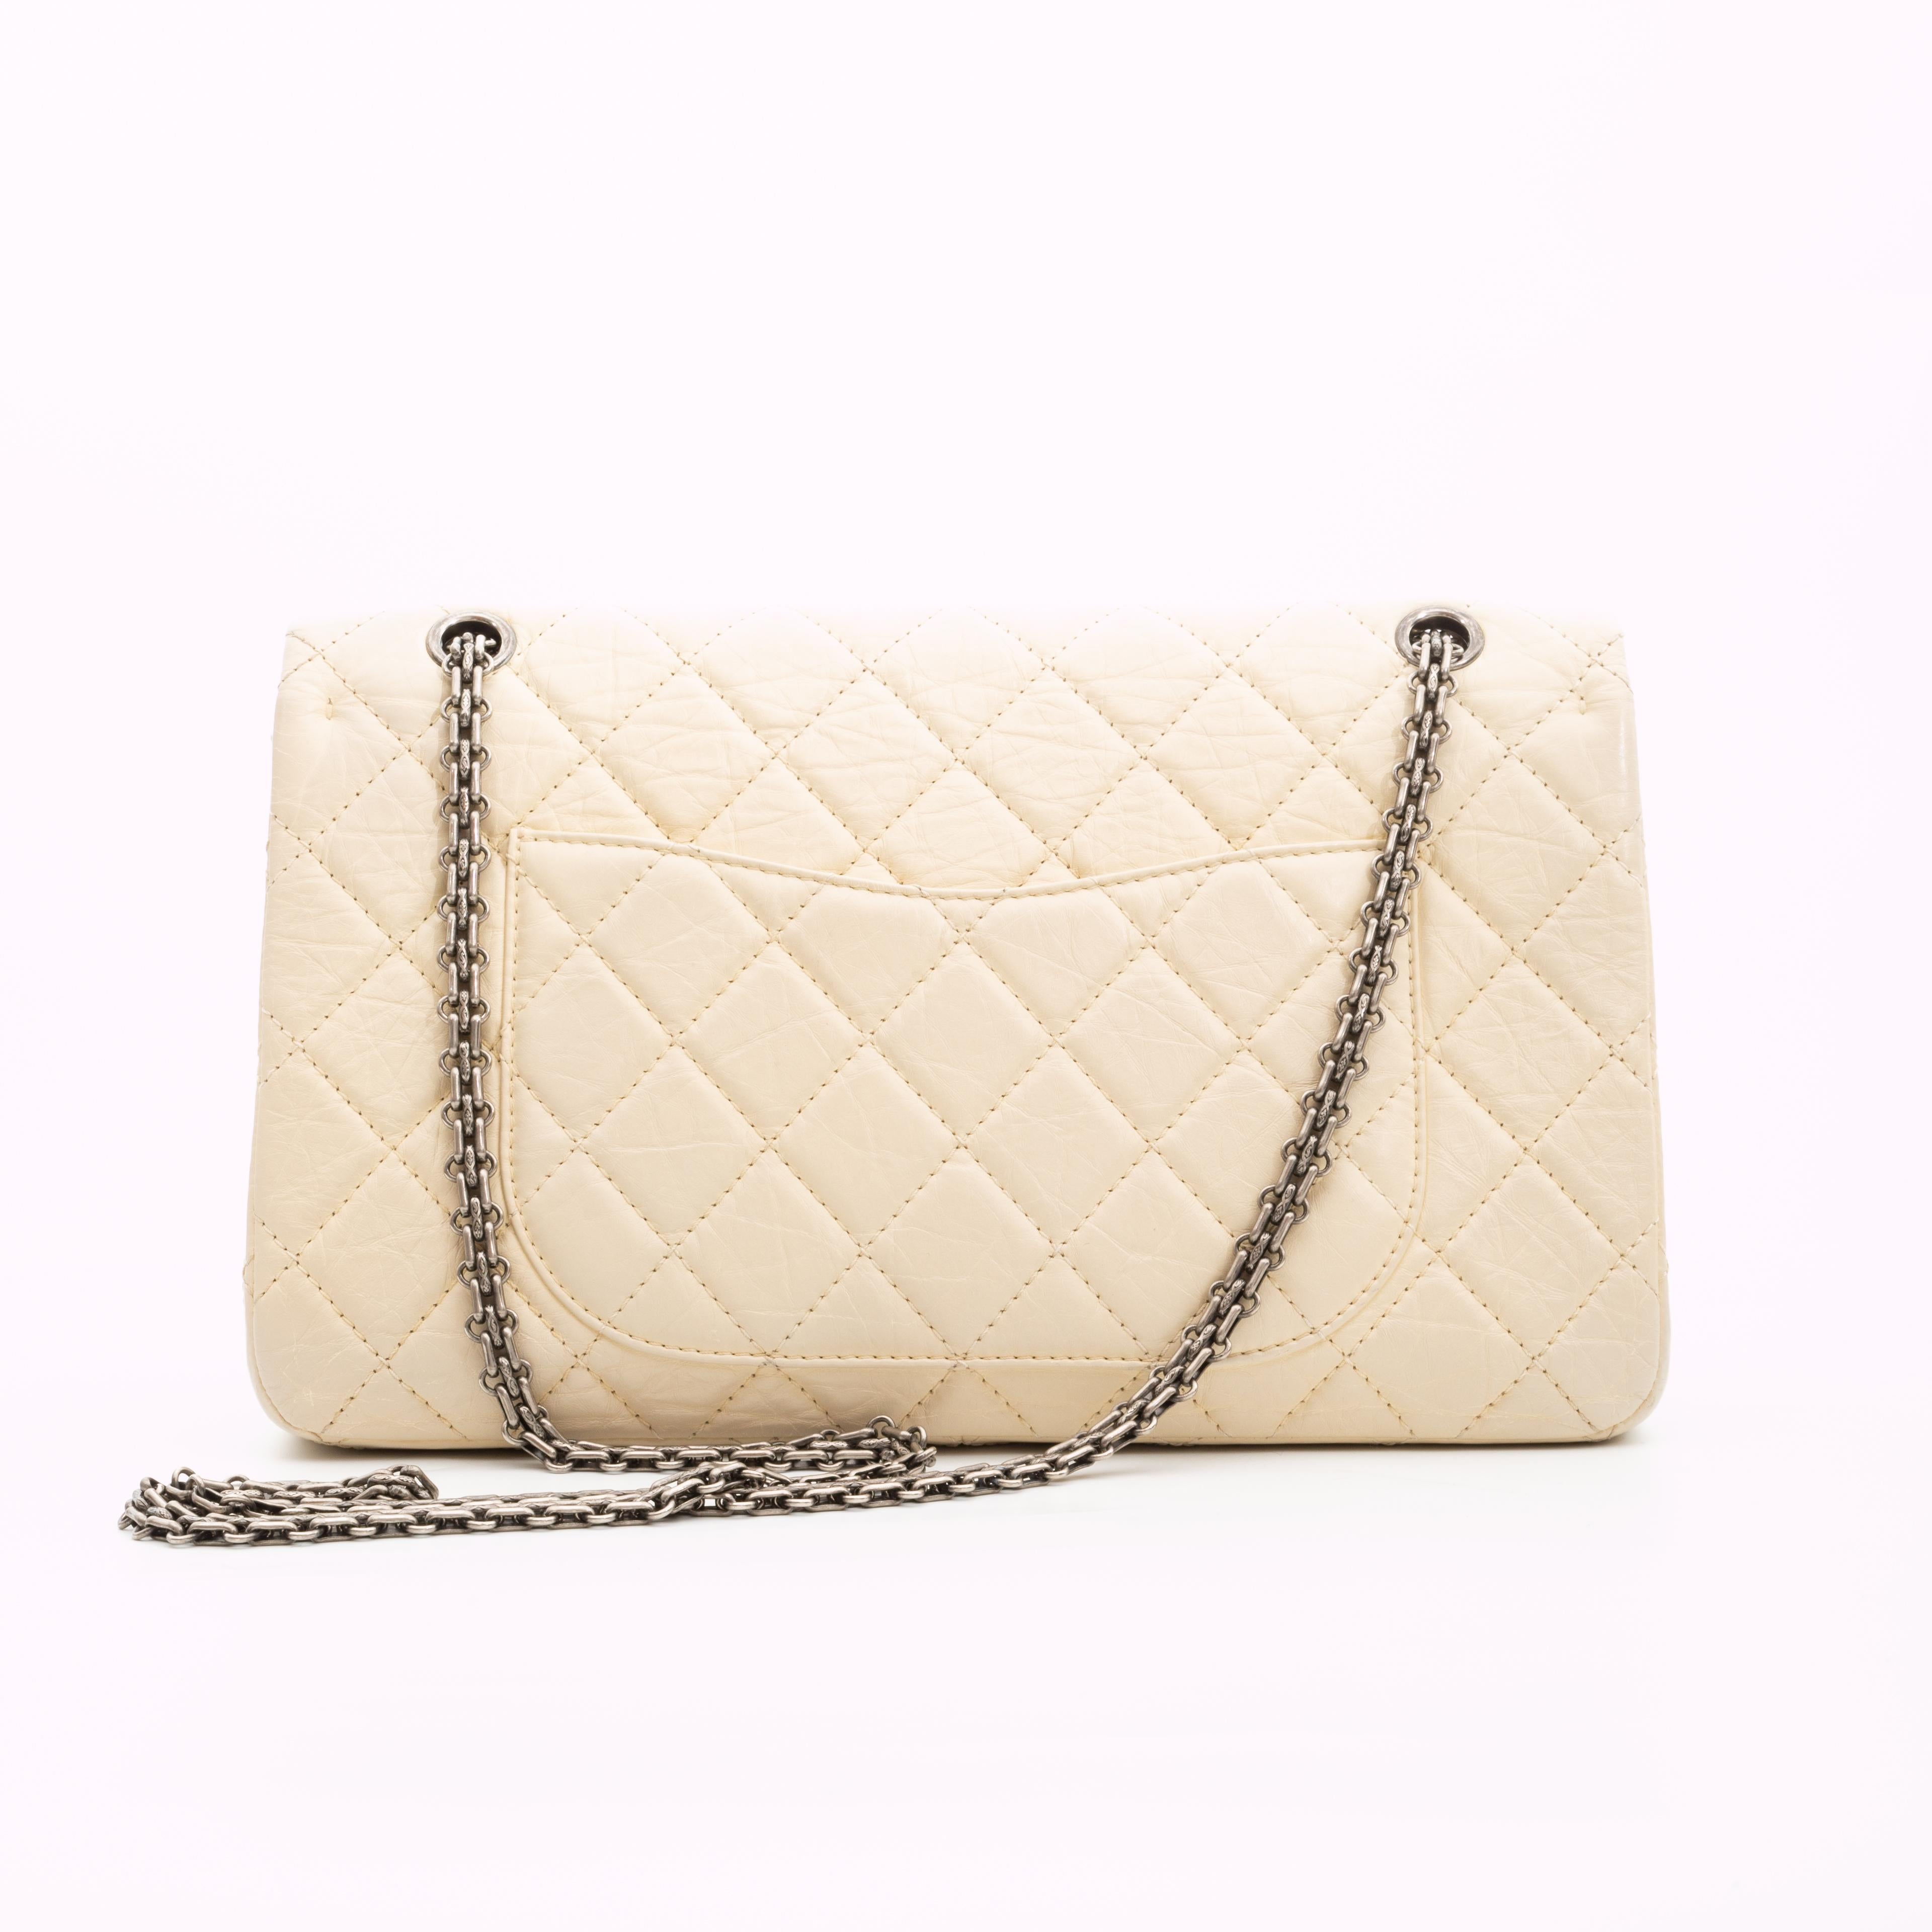 This shoulder bag is made of diamond quilted distressed calfskin leather in beige. The bag features an aged silver tone chain shoulder strap, a matching Mademoiselle turn lock, double flap interior and a matching beige leather interior with slip